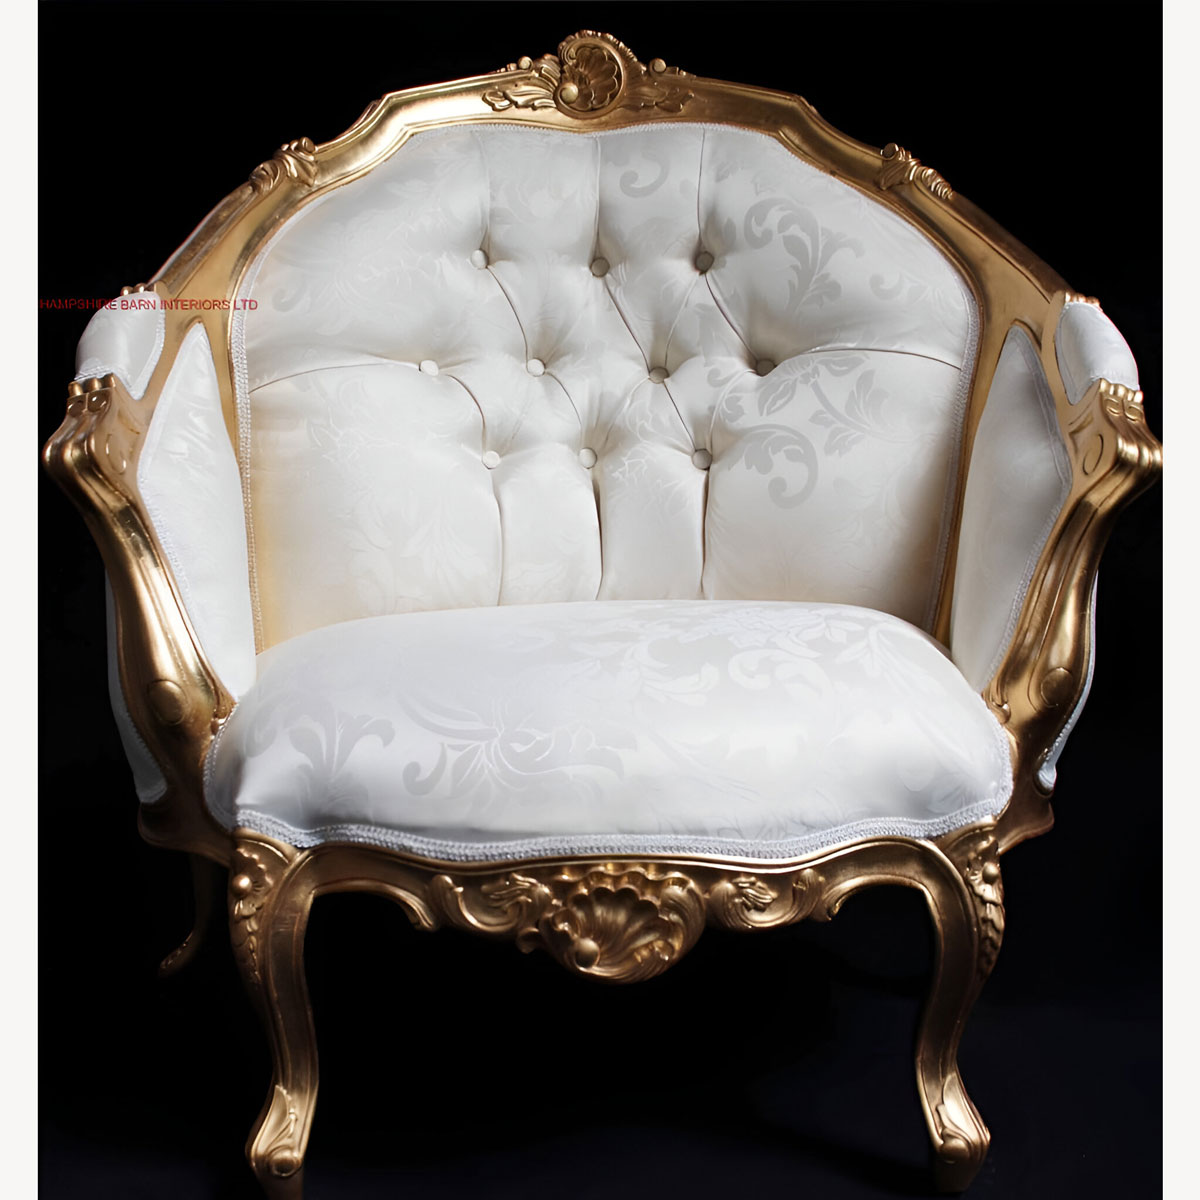 An Ascot Three Piece Salon Set Sofa Plus Two Armchairs Shown In Gold Leaf With Ivory Cream Fabric 3 - Hampshire Barn Interiors - An Ascot Three Piece Salon Set (Sofa Plus Two Armchairs) Shown In Gold Leaf With Ivory Cream Fabric -